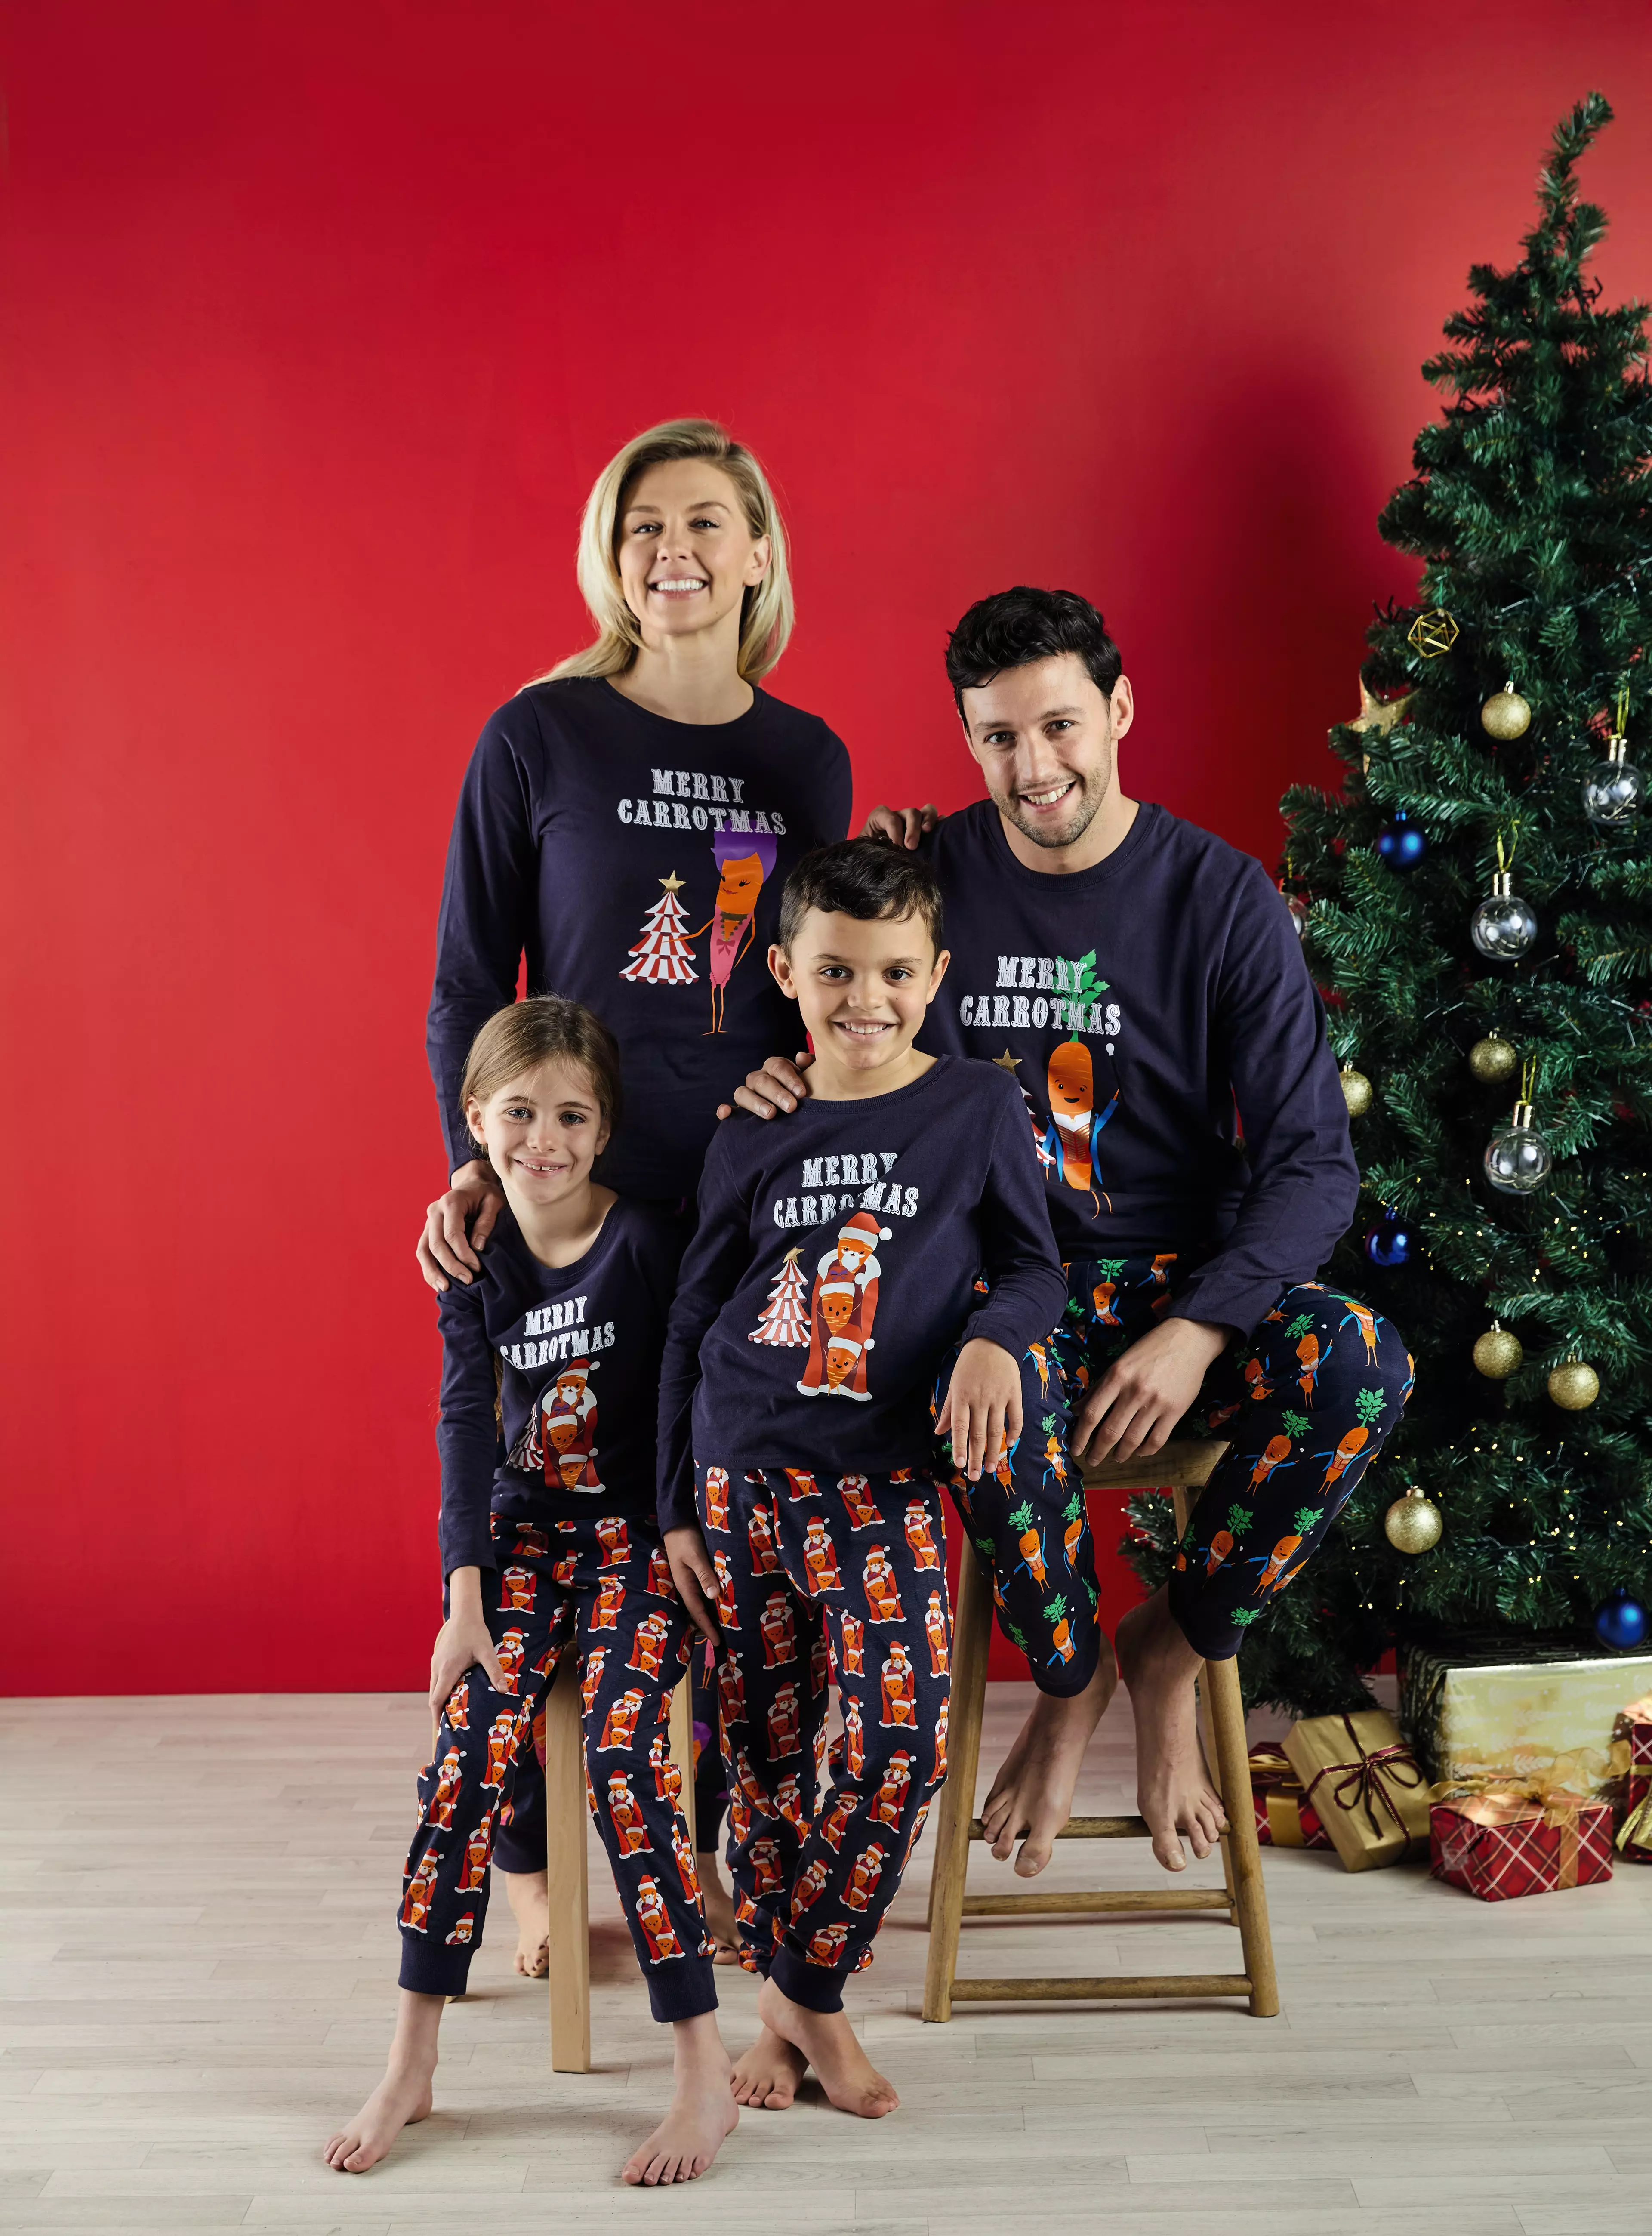 There are PJS available for the whole family (